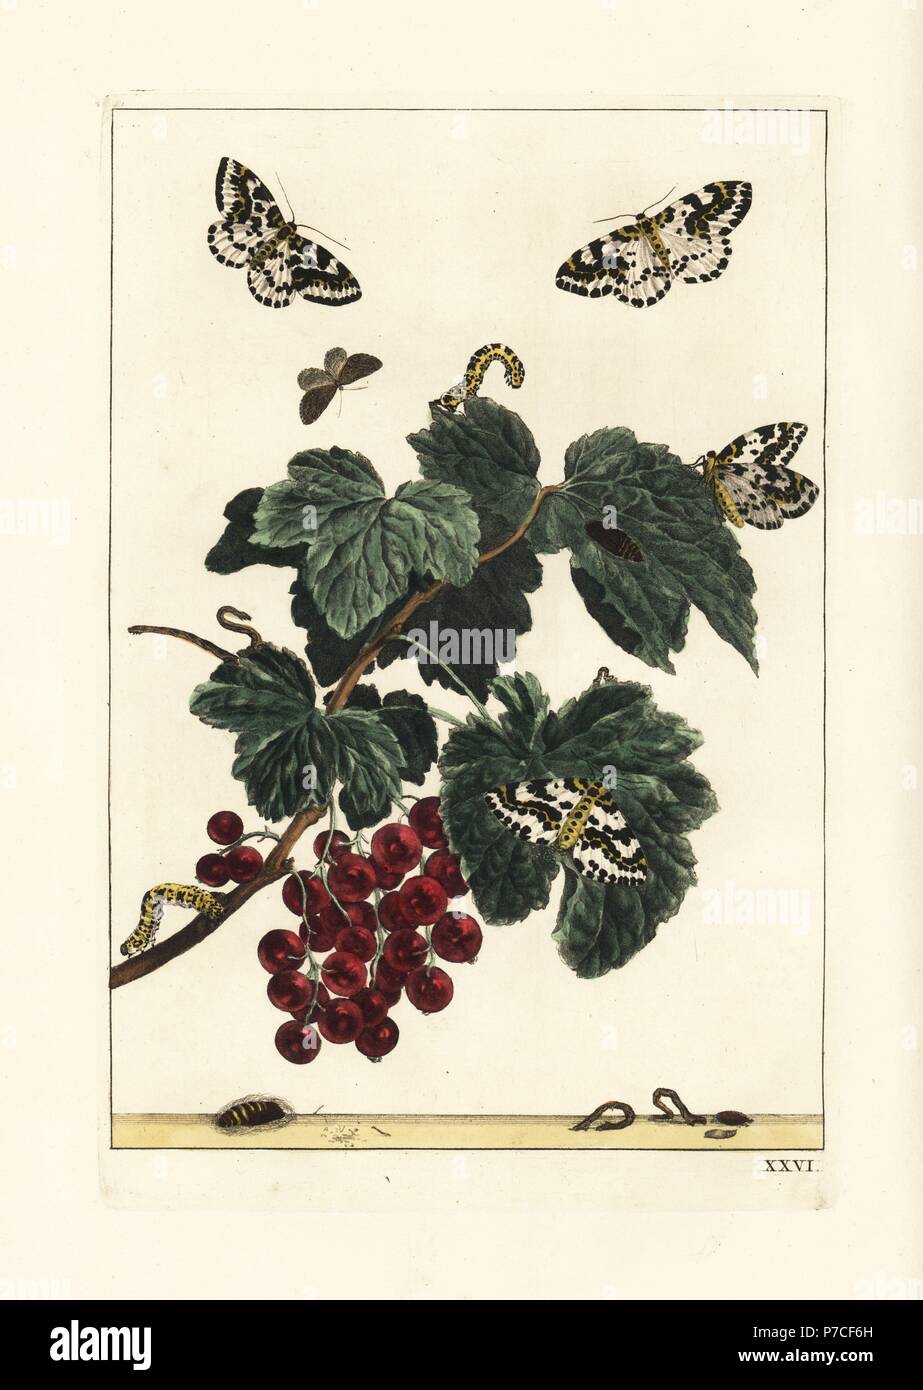 Magpie moth, Abraxas grossulariata, on a redcurrant branch, Ribes rubrum. Handcoloured copperplate engraving drawn and etched by Jacob l'Admiral in Naauwkeurige Waarneemingen omtrent de veranderingen van veele Insekten (Accurate Descriptions of the Metamorphoses of Insects), J. Sluyter, Amsterdam, 1774. For this second edition, M. Houttuyn added another eight plates to the original 25. Stock Photo